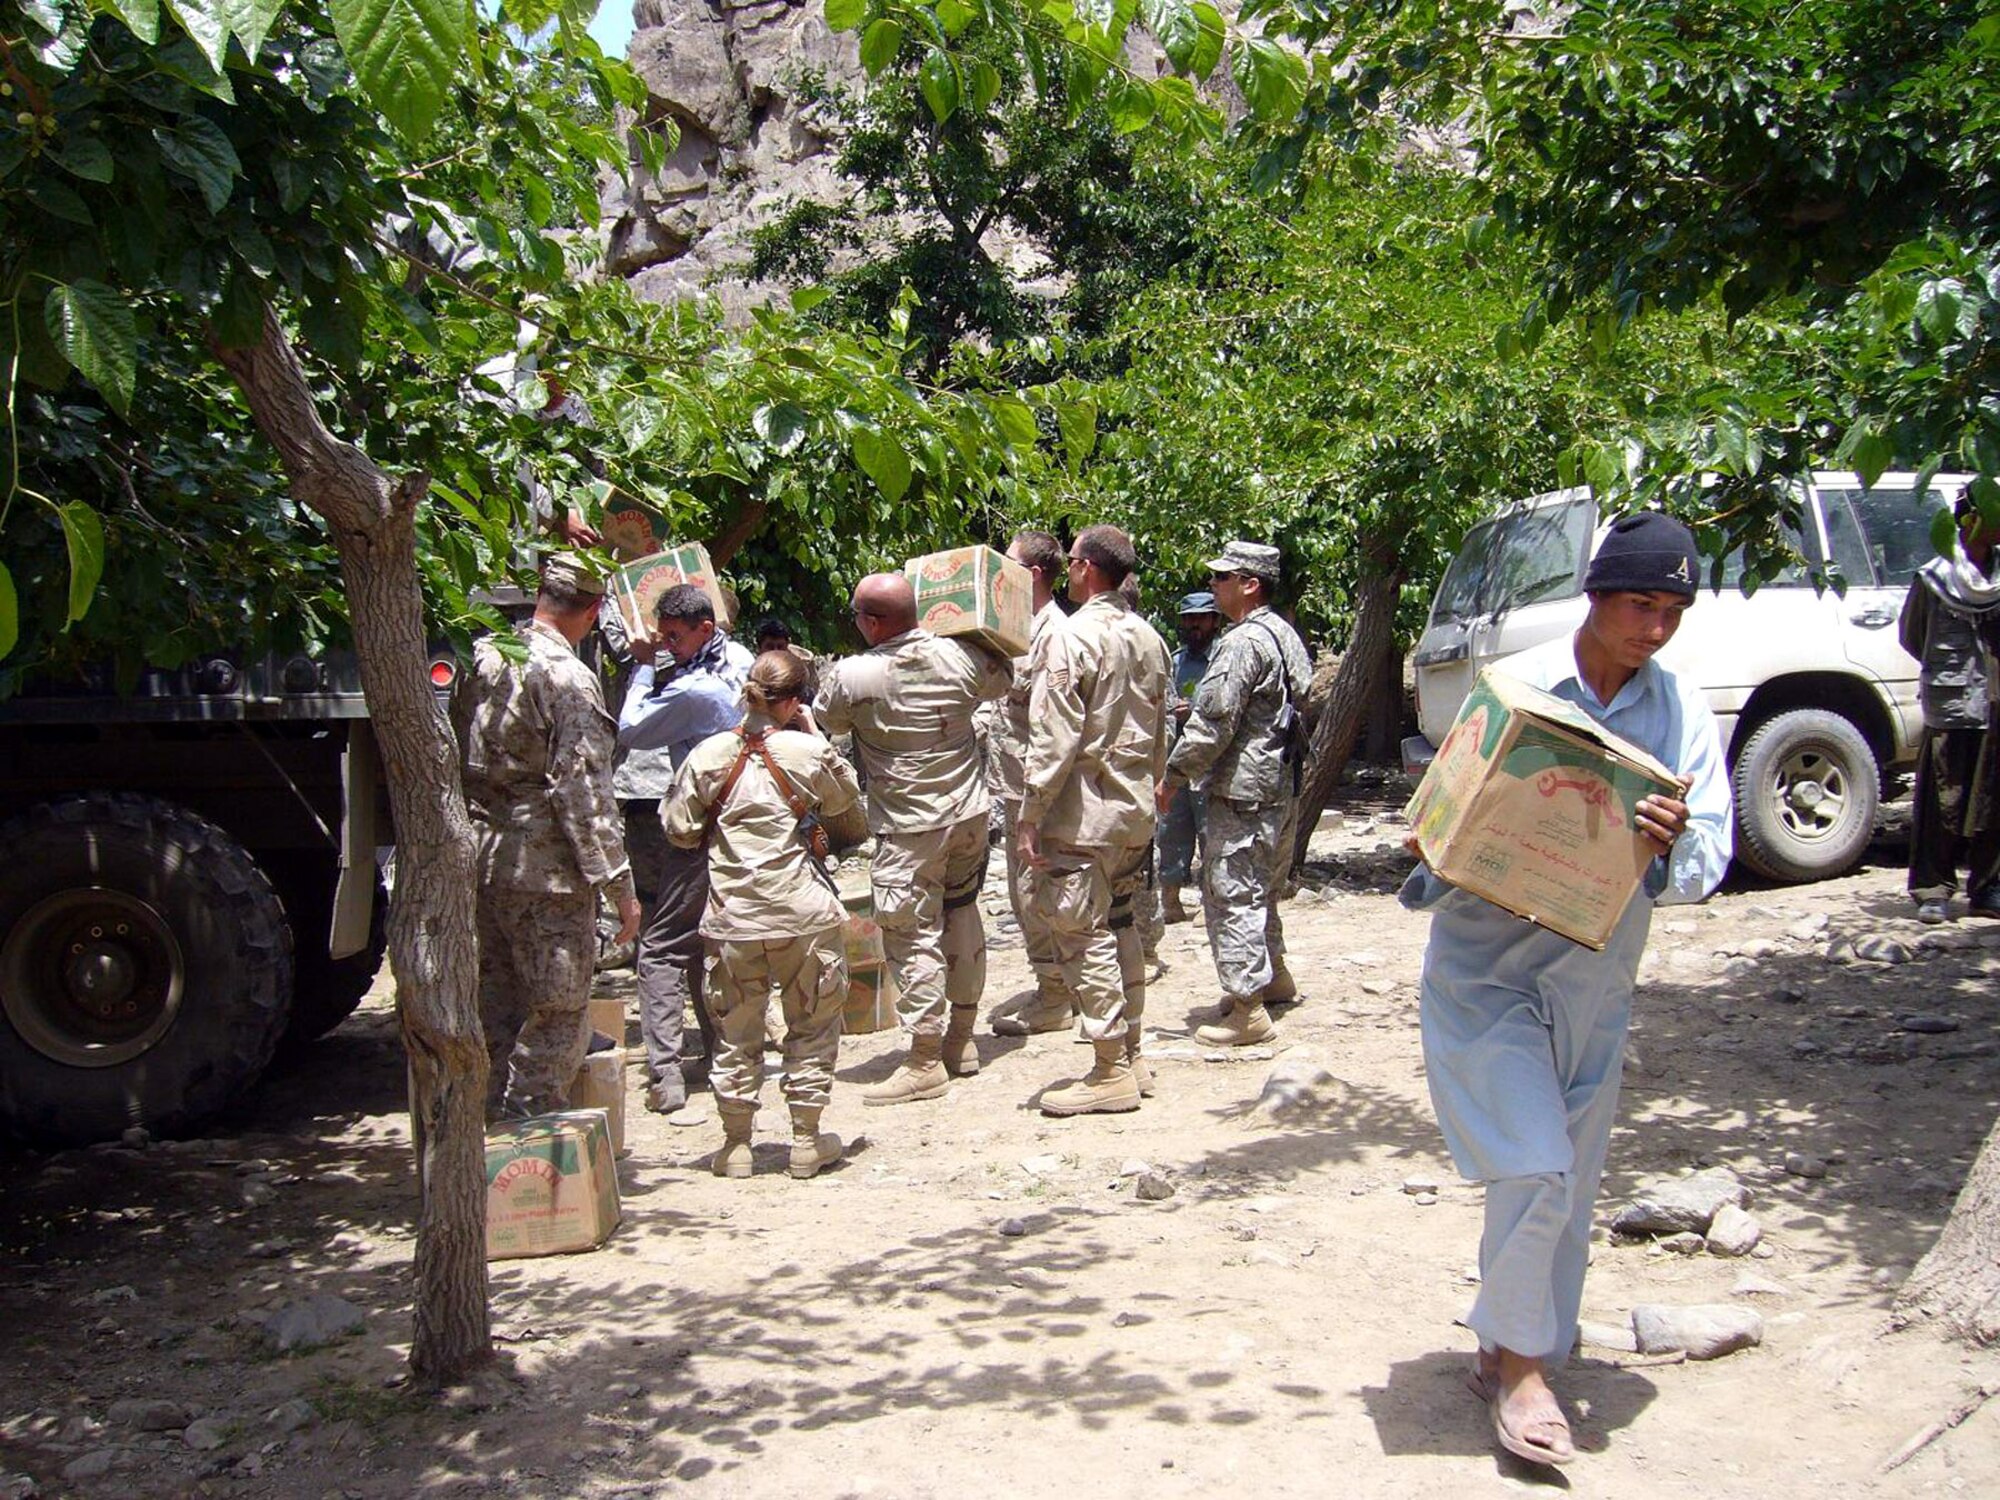 The Panjshir Provincial Reconstruction Team, members of the 405th Civil Affairs Battalion and a local villager offload bags and boxes of food at the Dara District Center in Afghanistan on Monday, June 12. (Courtesy photo/Shahla Hammond)